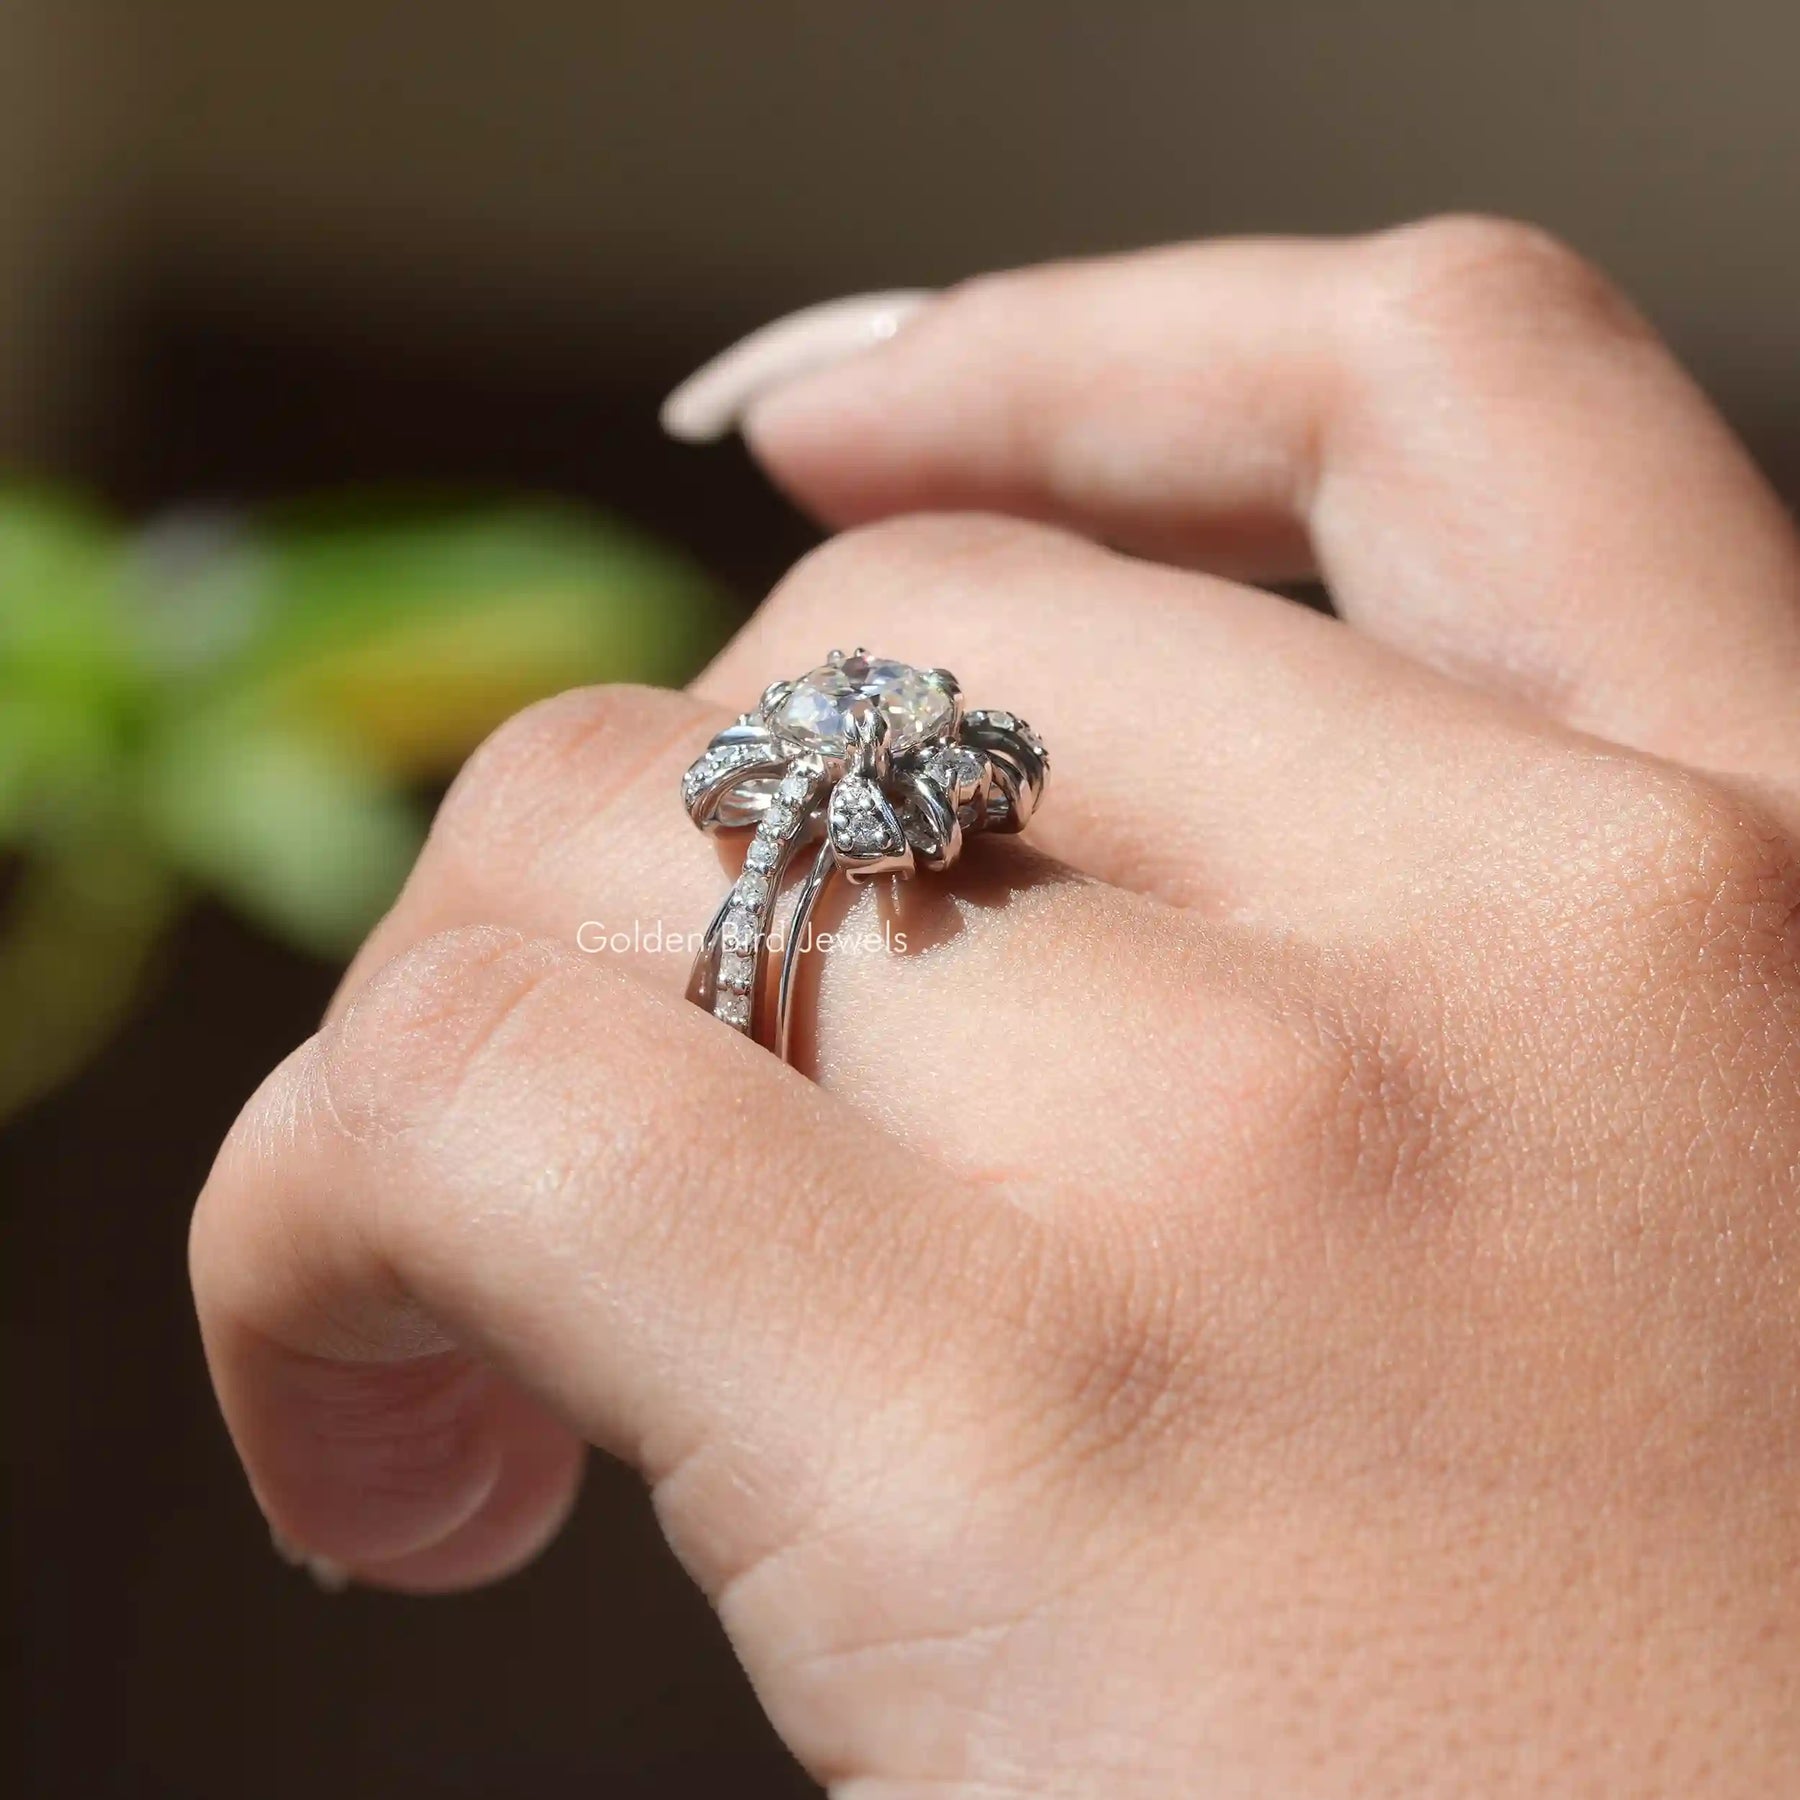 [Old Mine Cushion Cut Moissanite Engagement Ring Set In Prongs]-[Golden Bird Jewels]